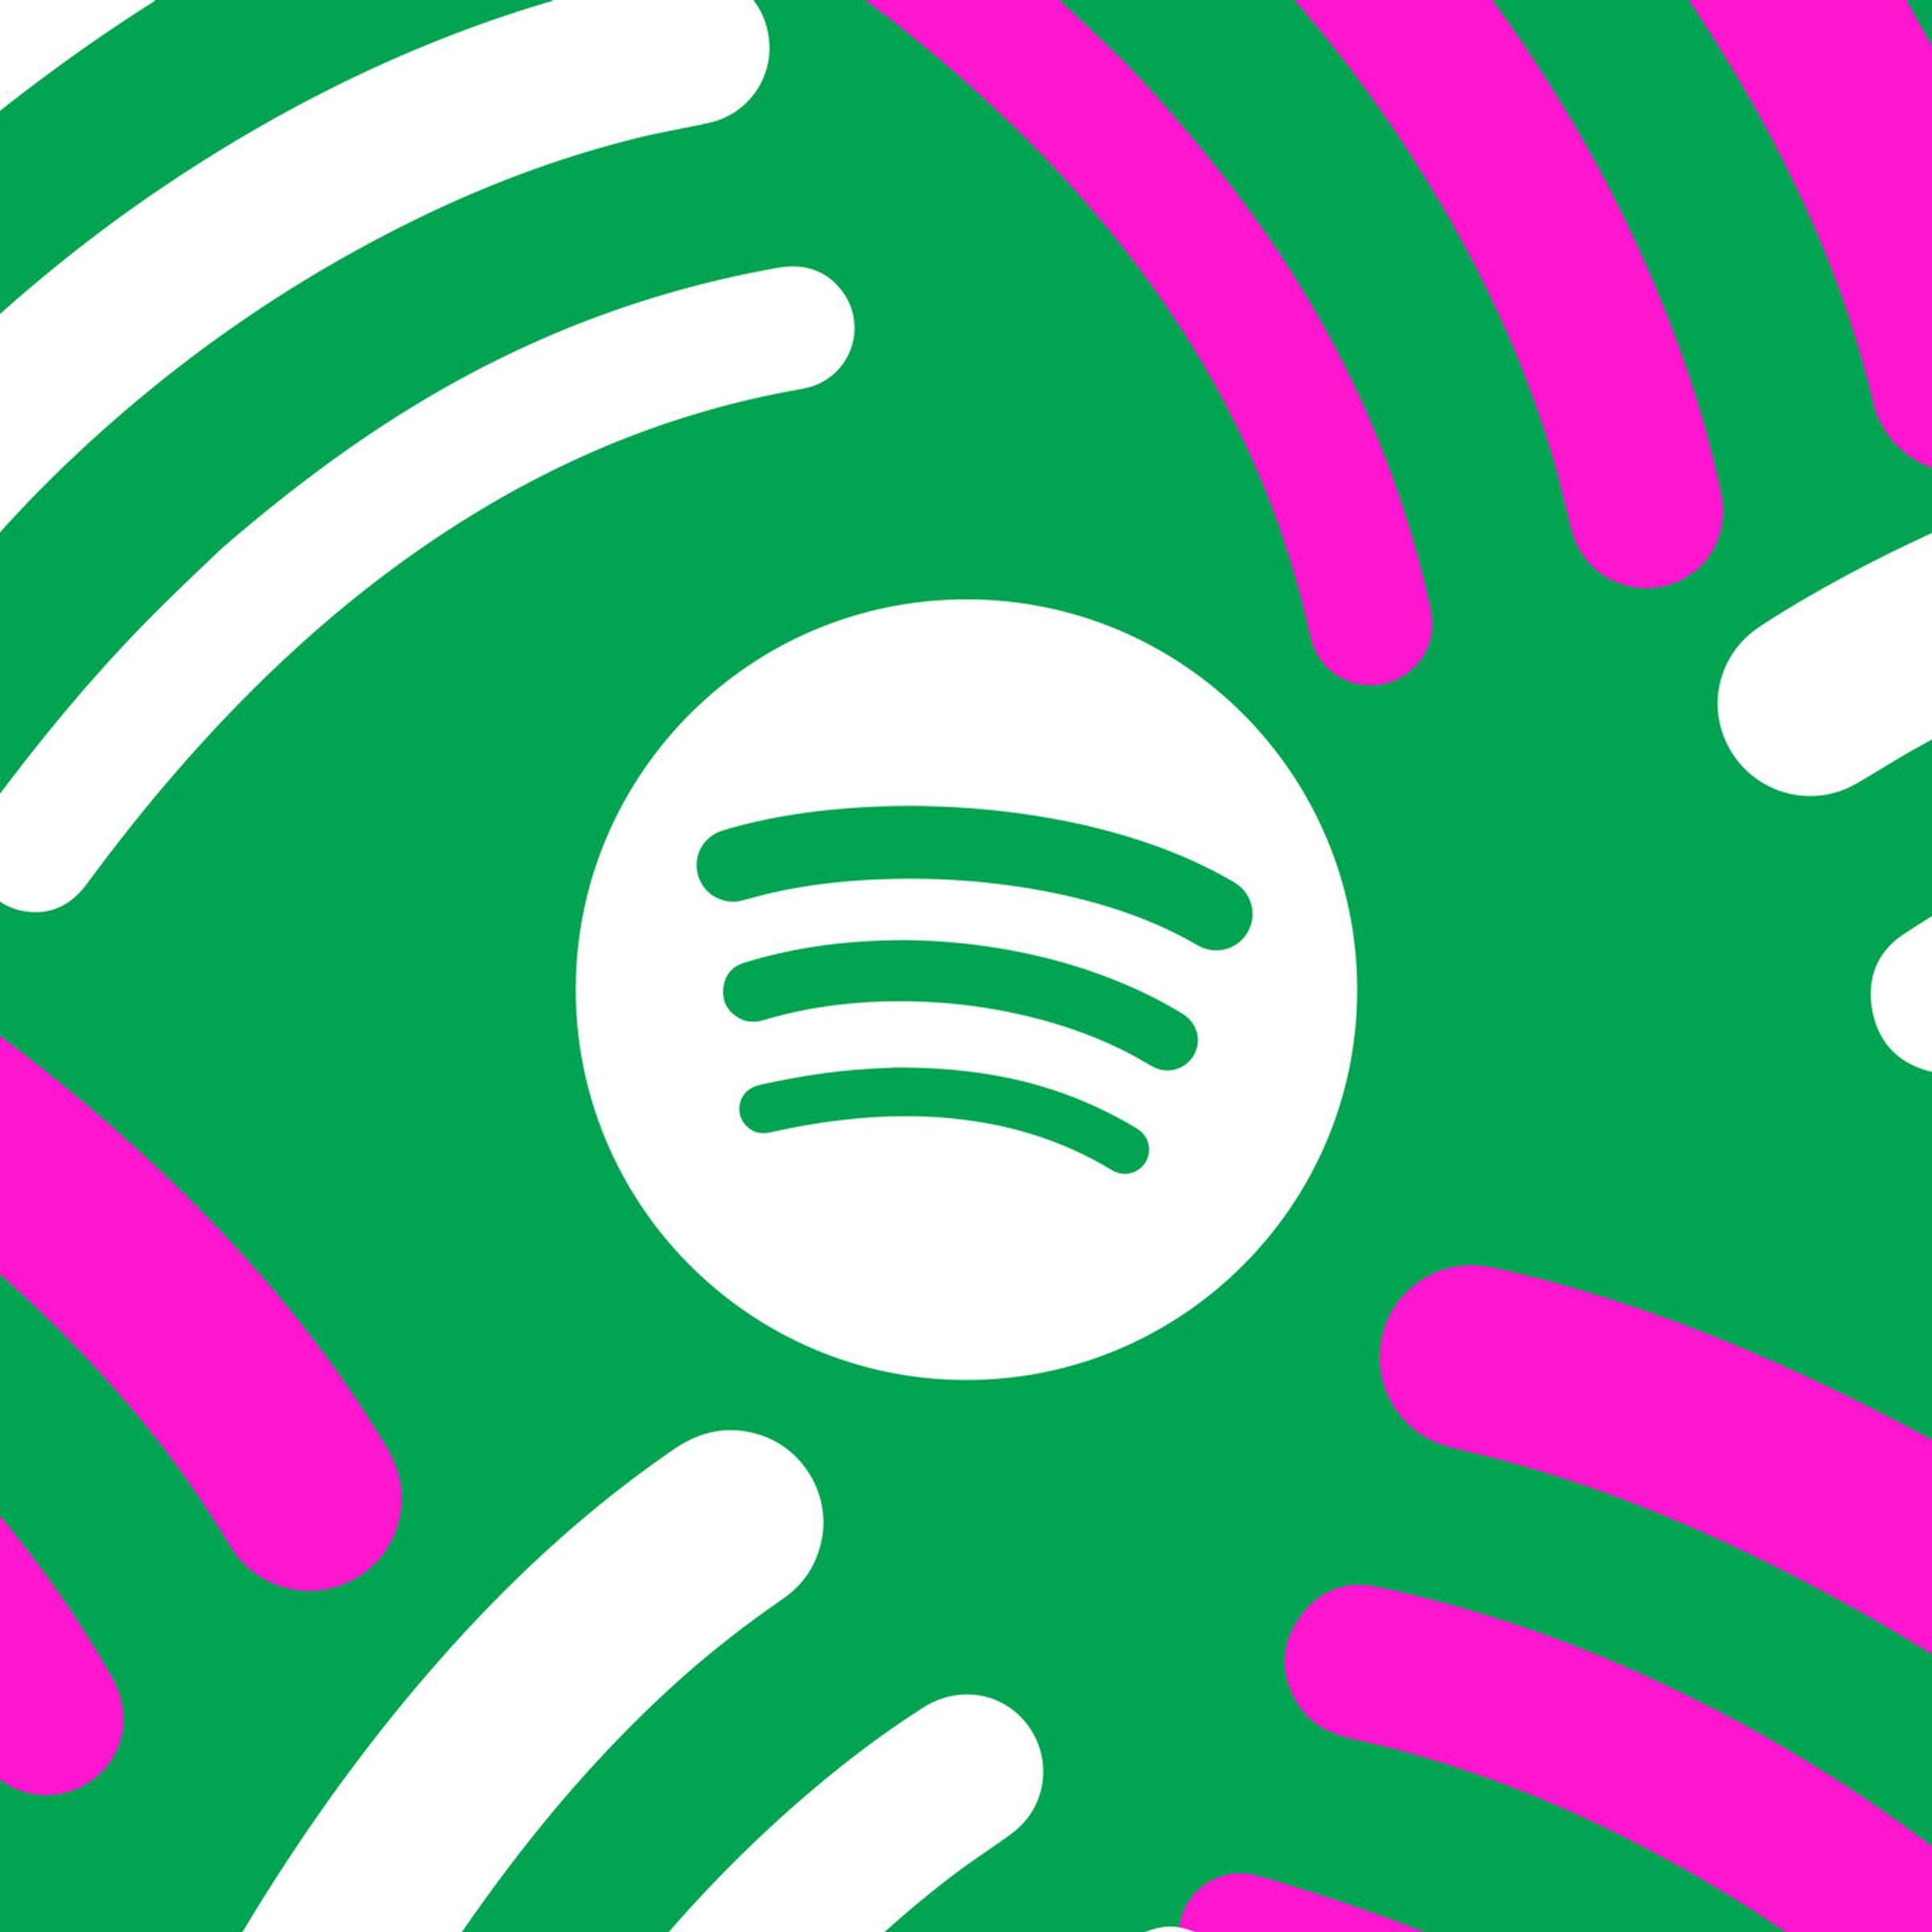 The Spotify logo on a green backdrop surrounded by pink and white graphics.